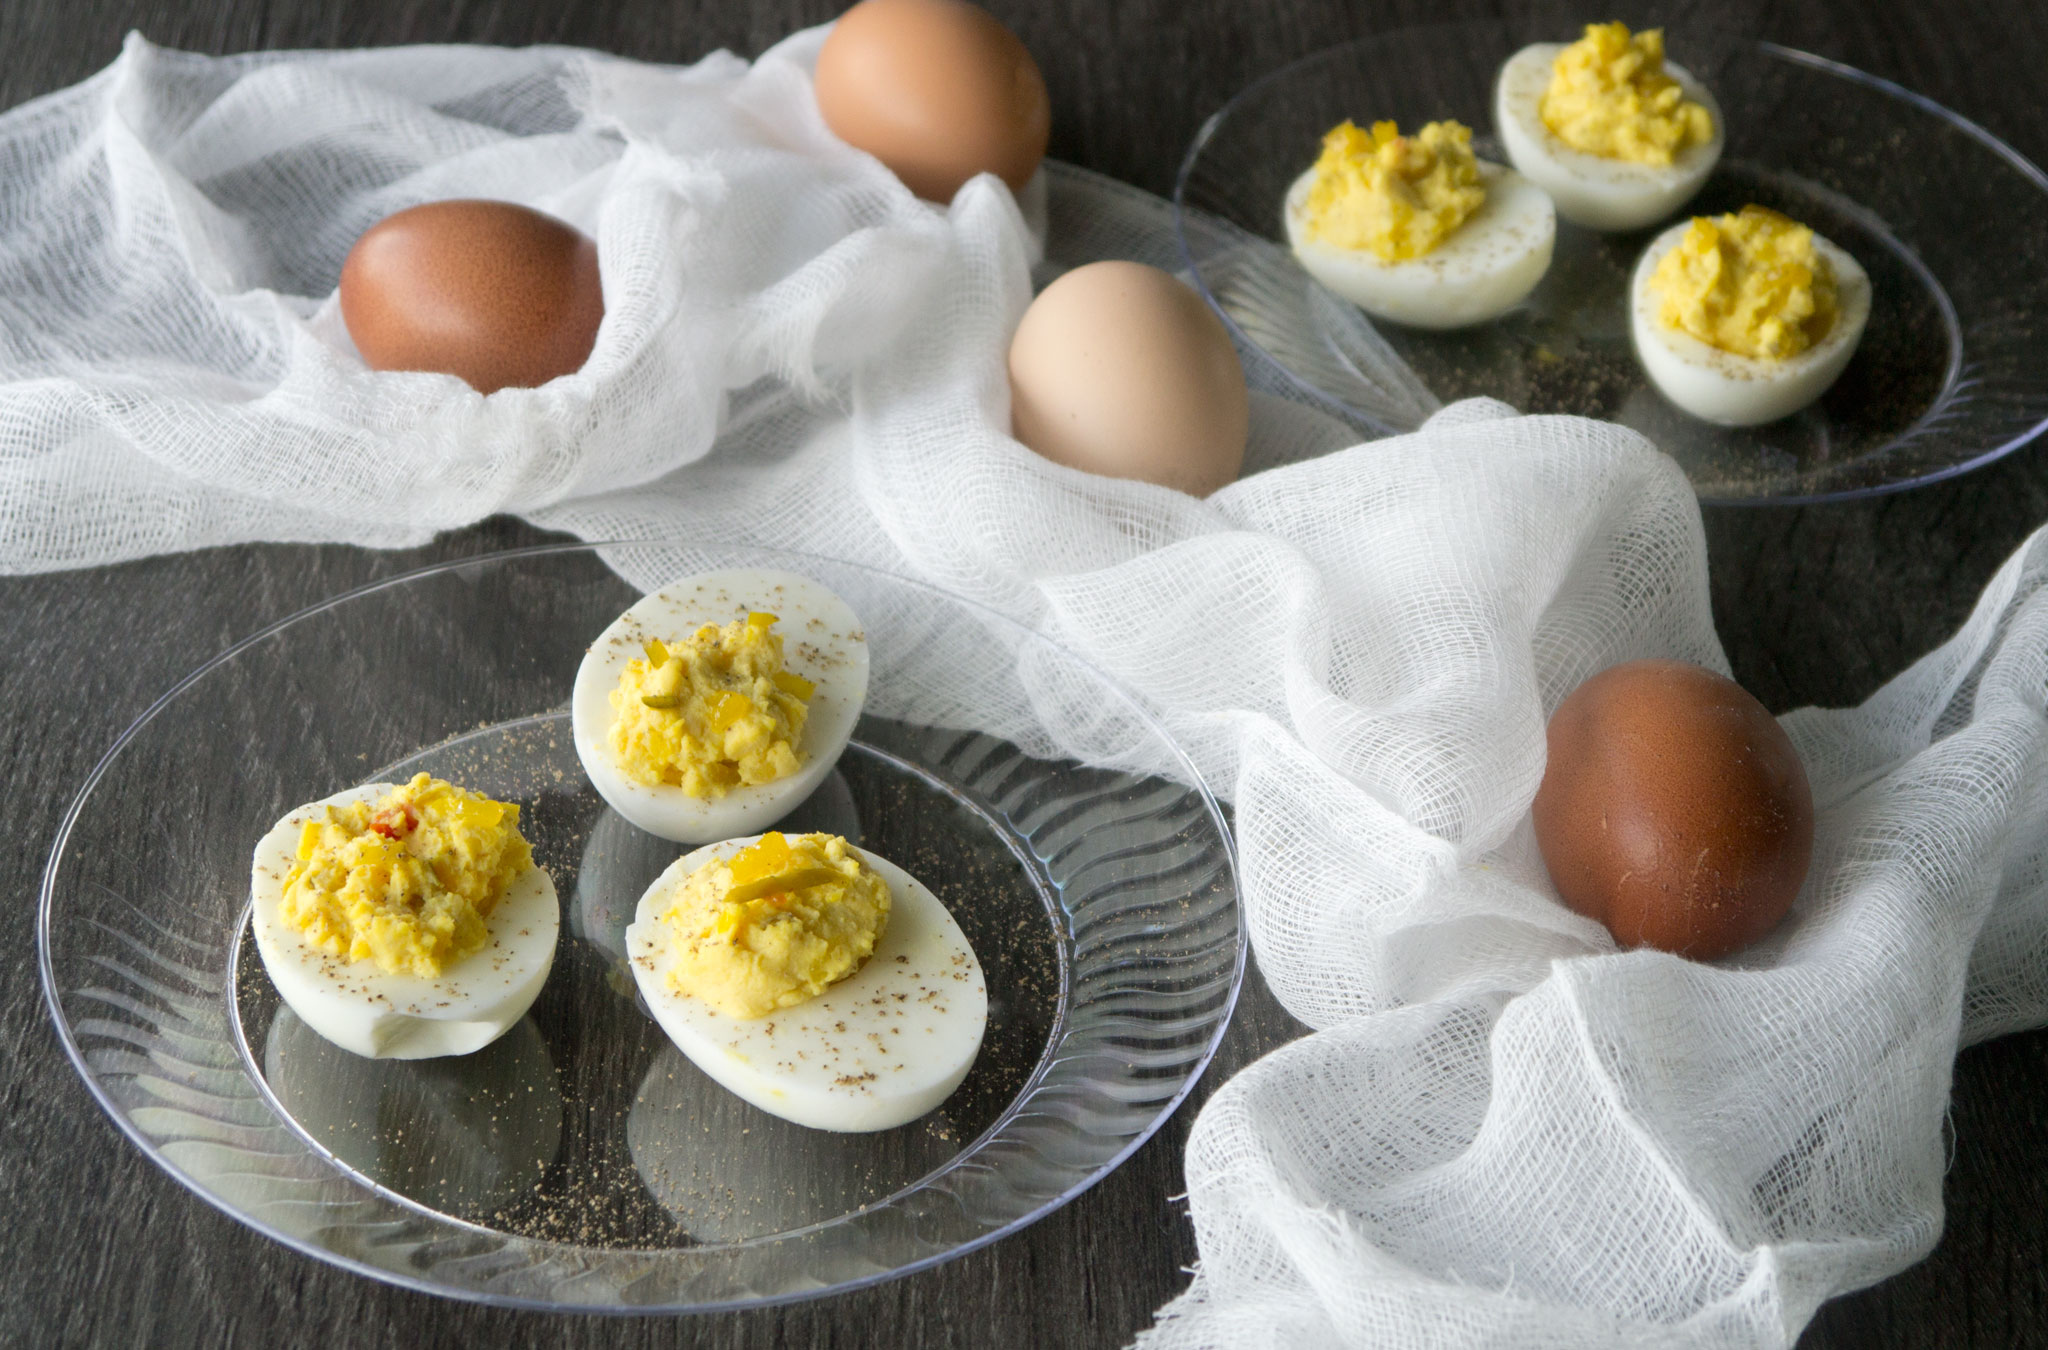 Enjoy deviled eggs this National - Hotpoint Appliances